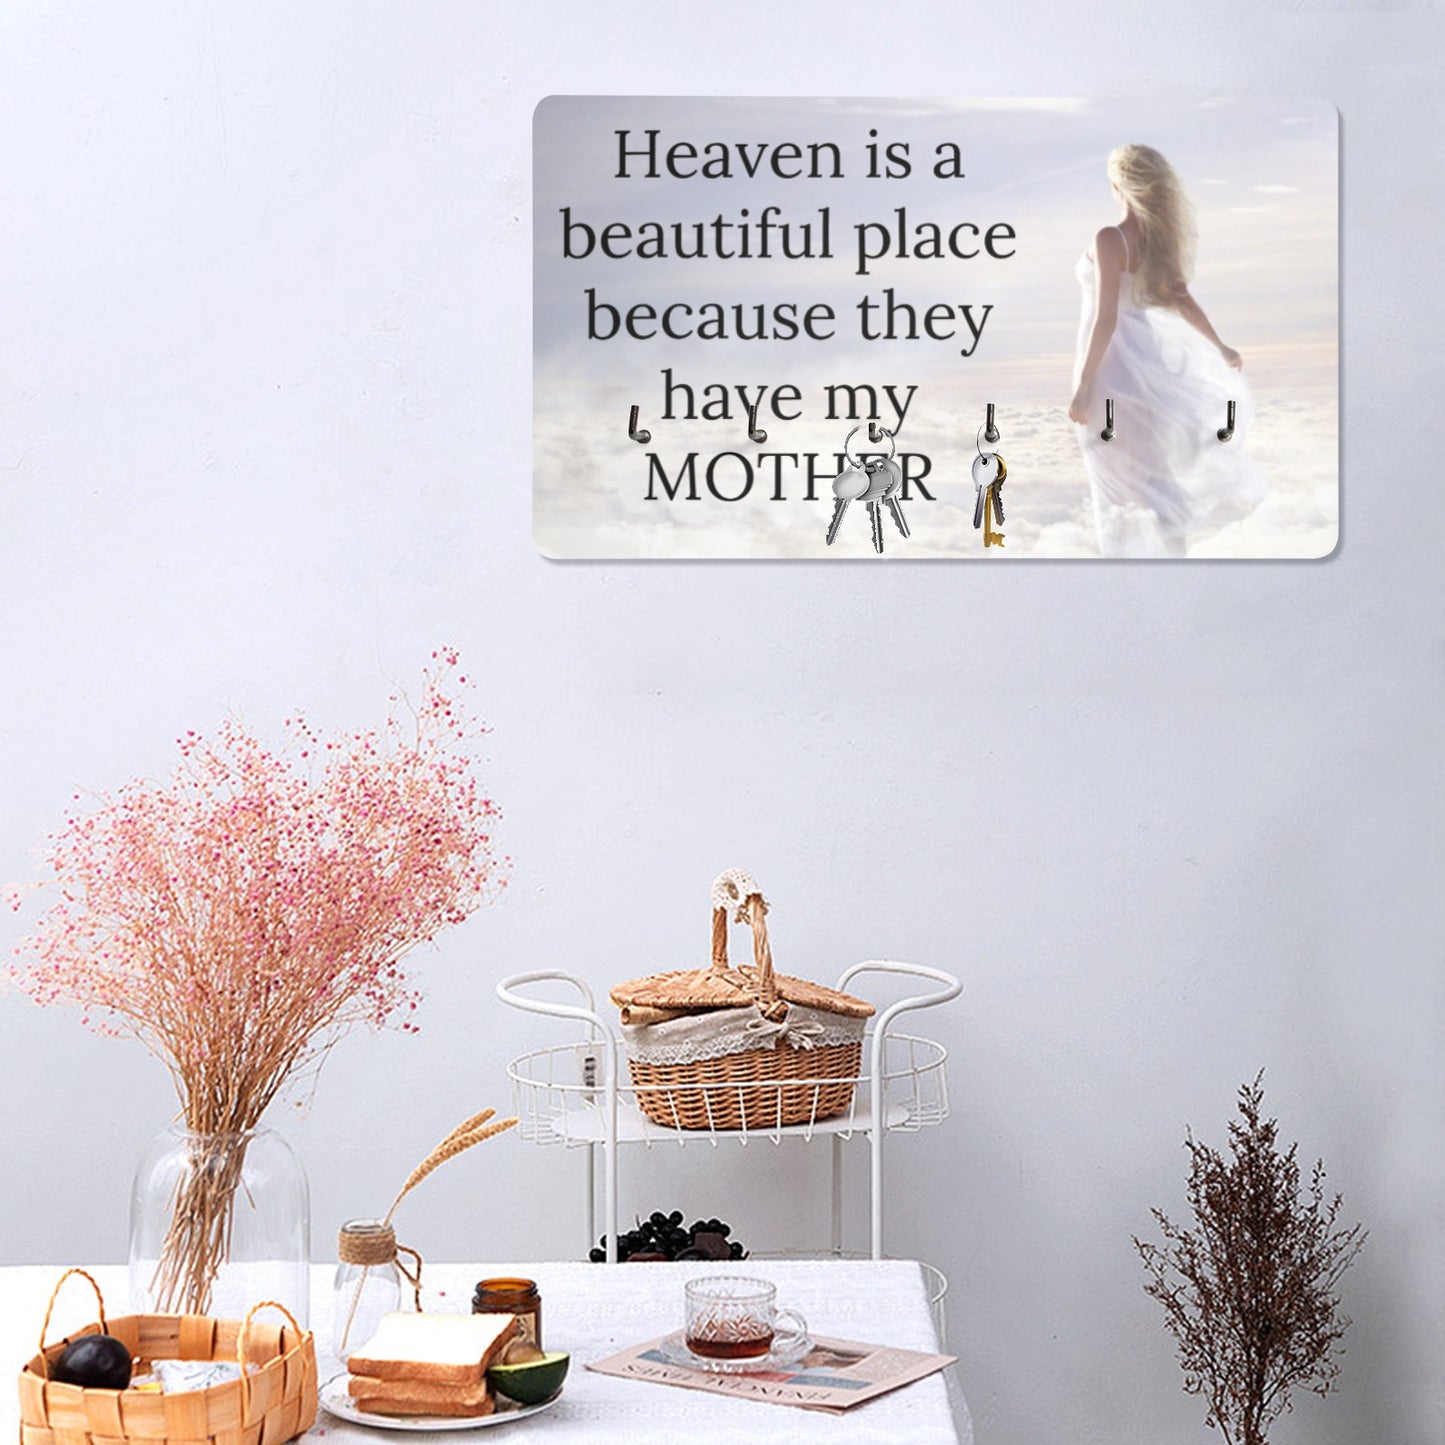 Heavenly Mother Wall Mounted Decor Key Holder - Wall Decor Key Holder - Zanlana Design and Home Decor